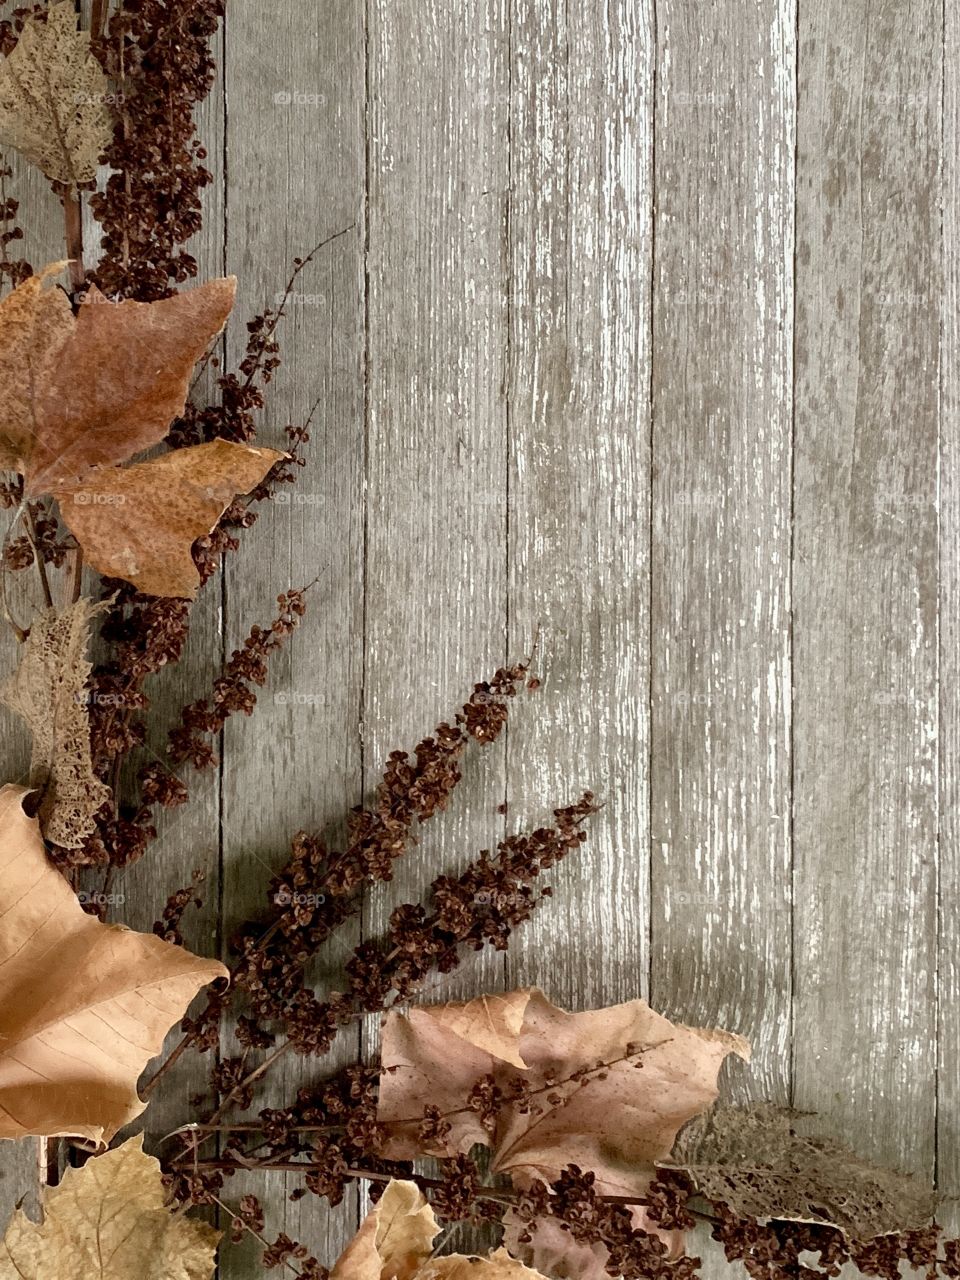 Dried plant and withered leaves in autumn colors on wood with copy space, portrait